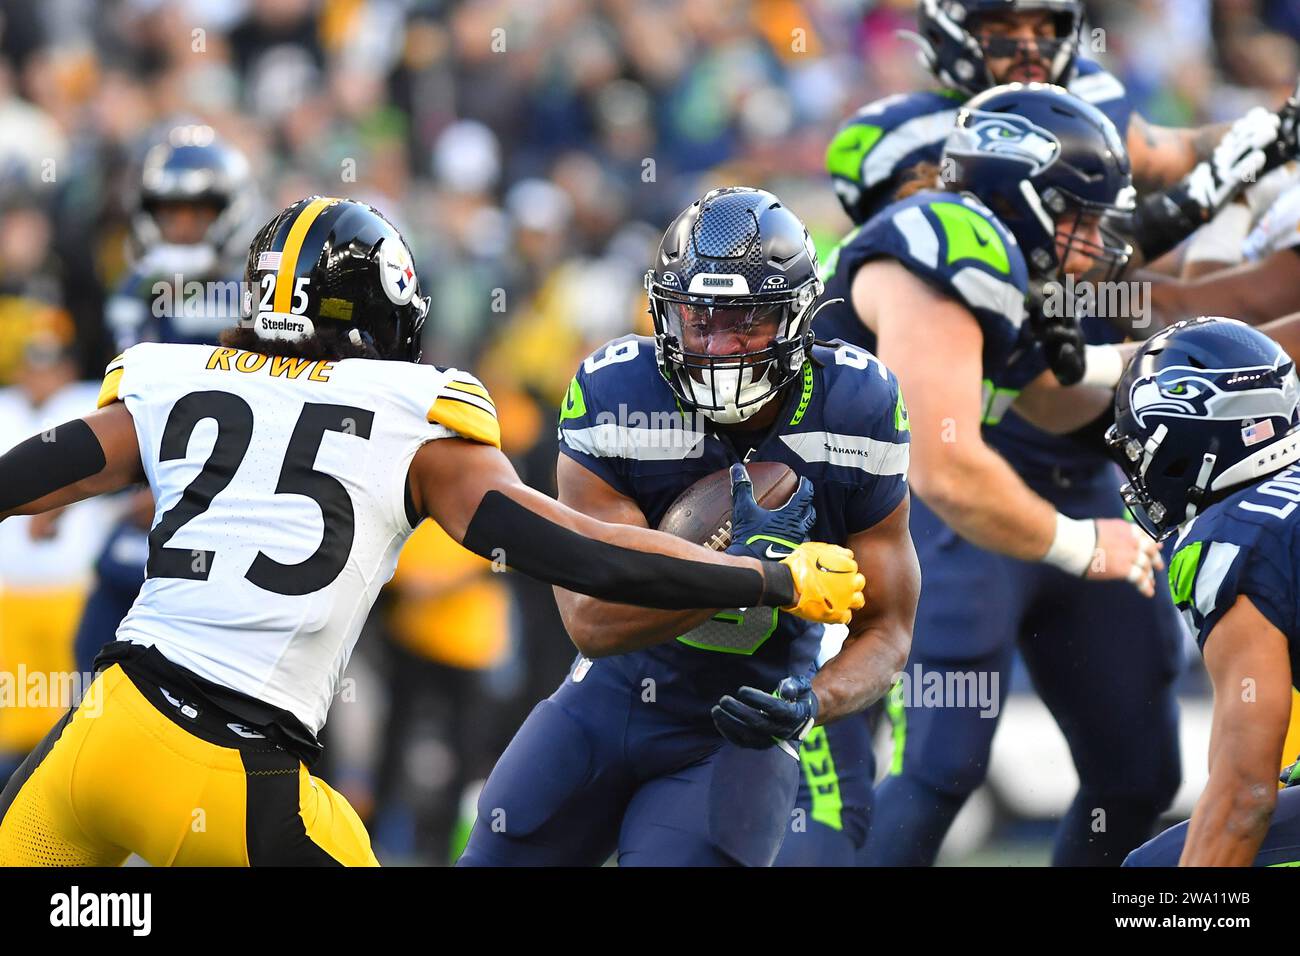 Seattle, WA, USA. 31st Dec, 2023. Seattle Seahawks running back Kenneth Walker III (9) during the NFL Football game between the Pittsburgh Steelers and Seattle Seahawks in Seattle, WA. Pittsburgh defeated Seattle 30-23. Steve Faber/CSM/Alamy Live News Stock Photo